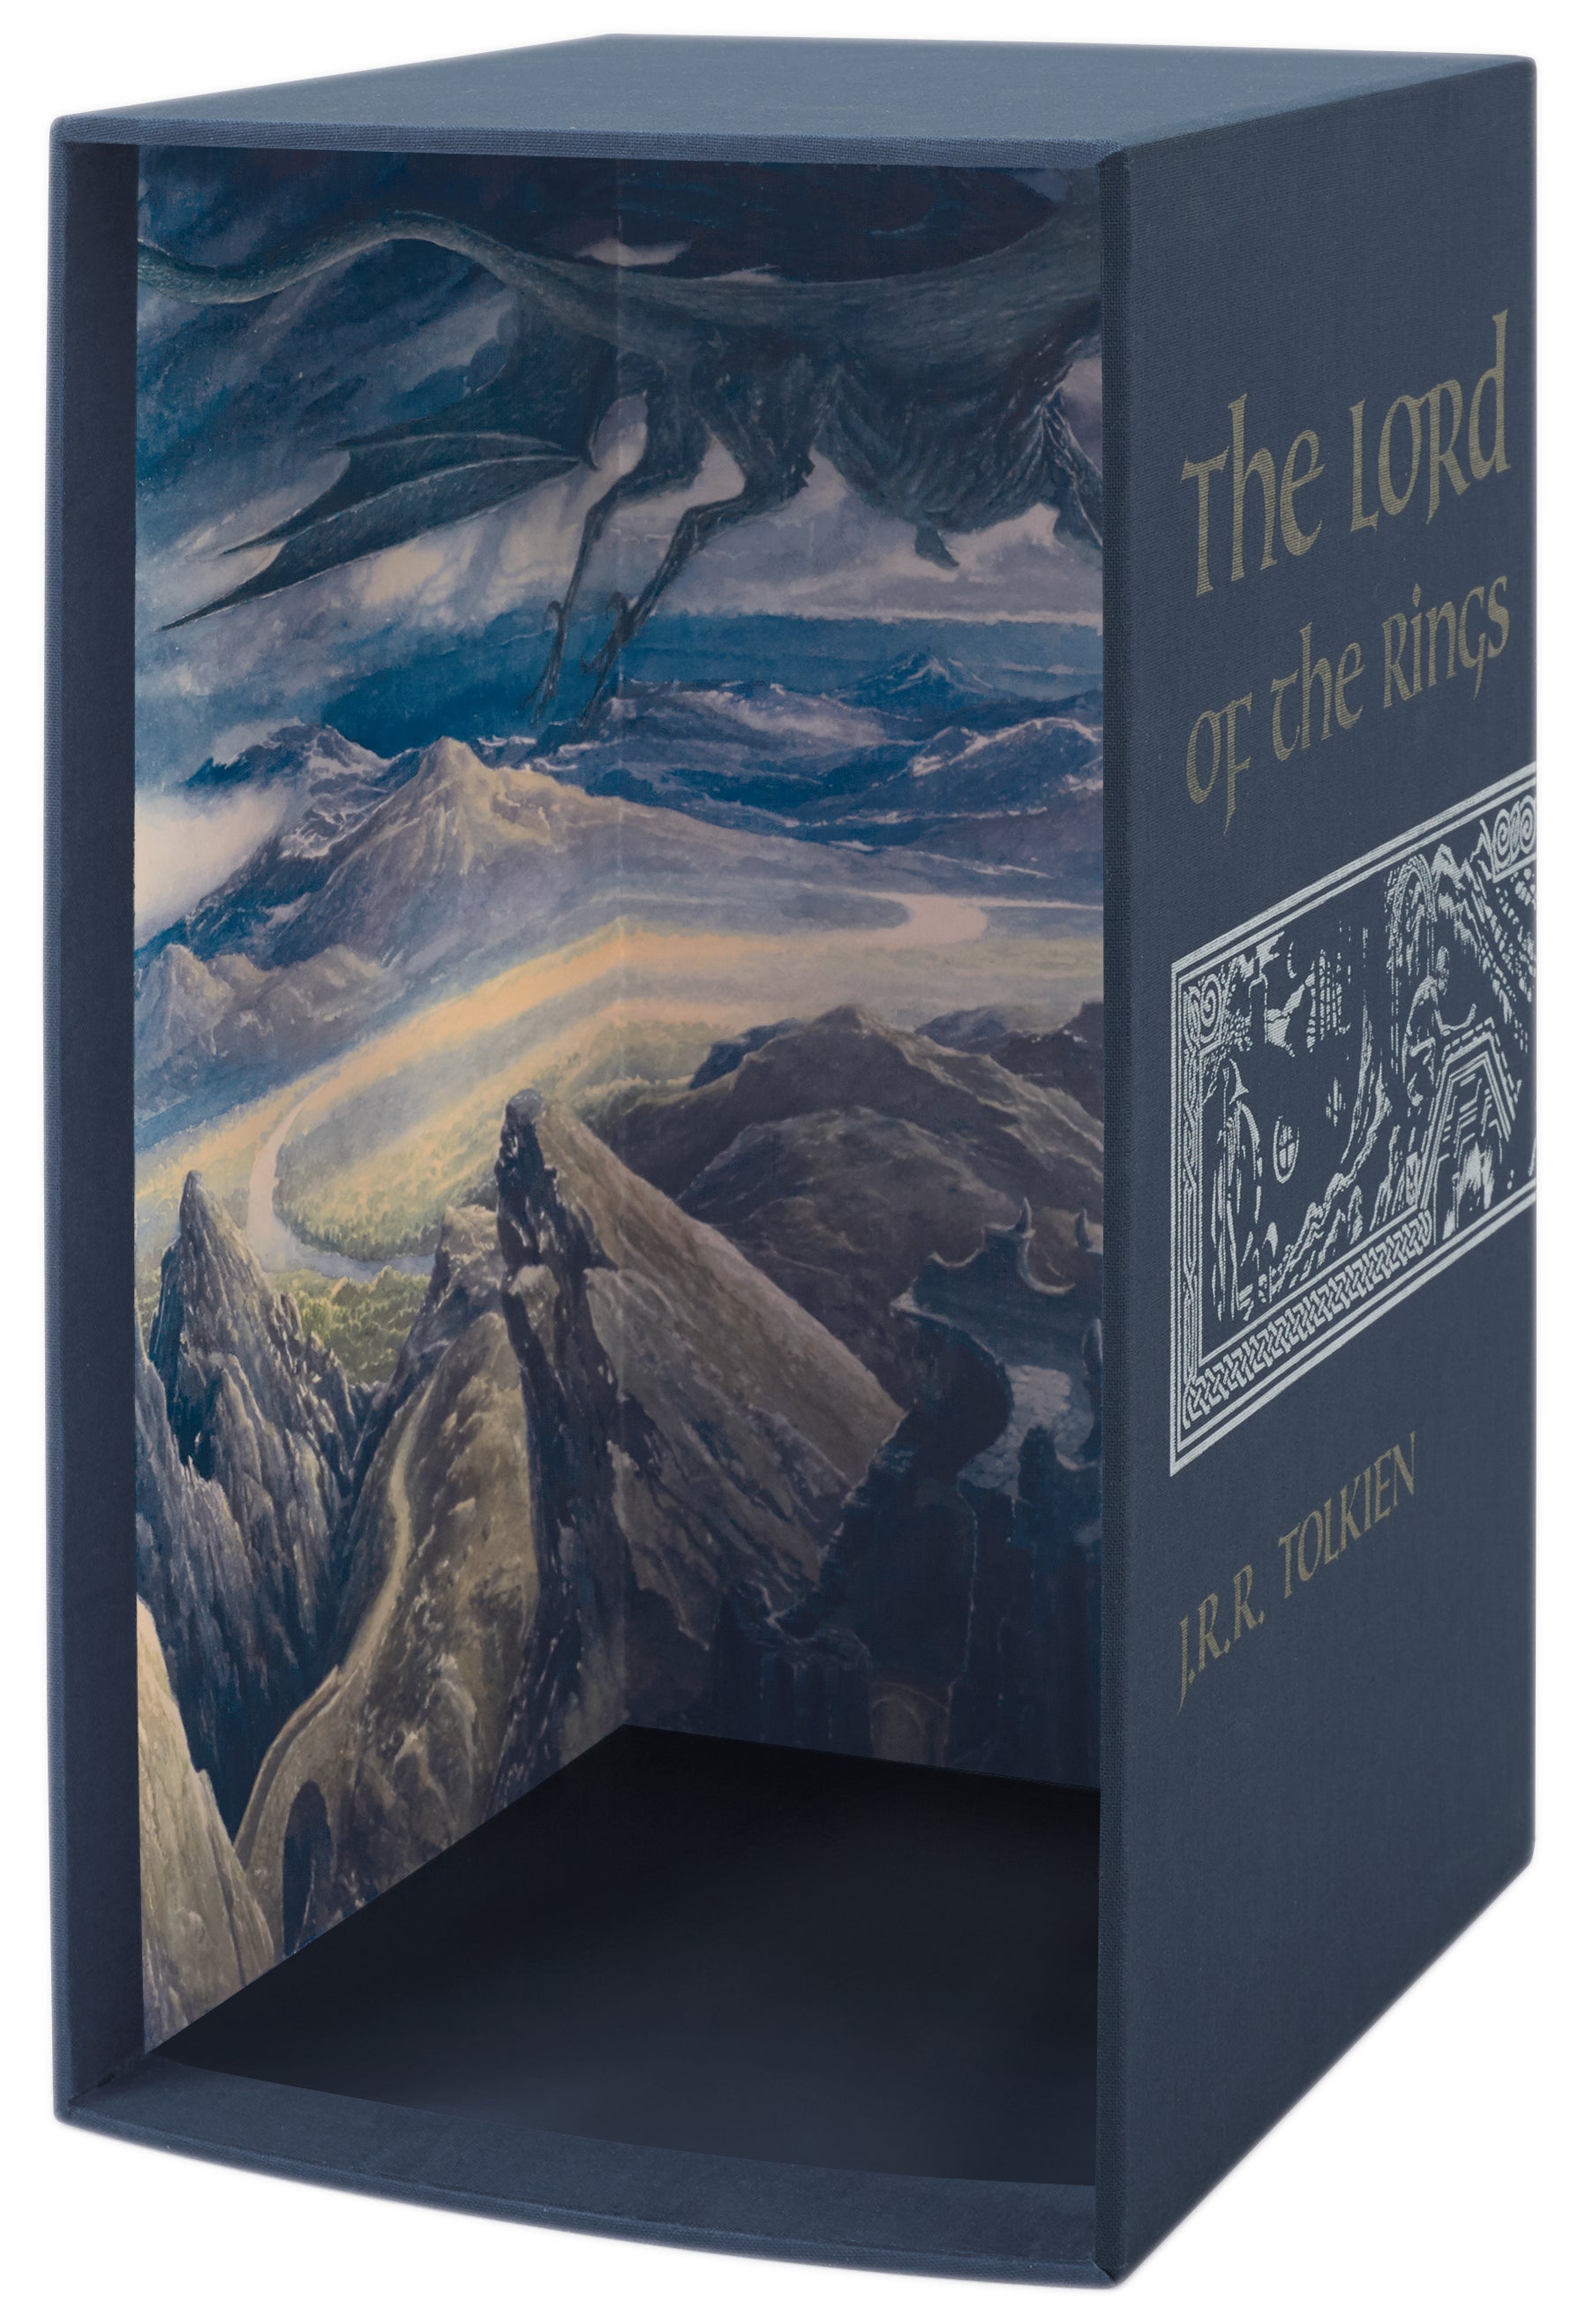 Image: ©Alan Lee for the Folio Society’s edition of J.R.R. Tolkien’s The Lord of the Rings.